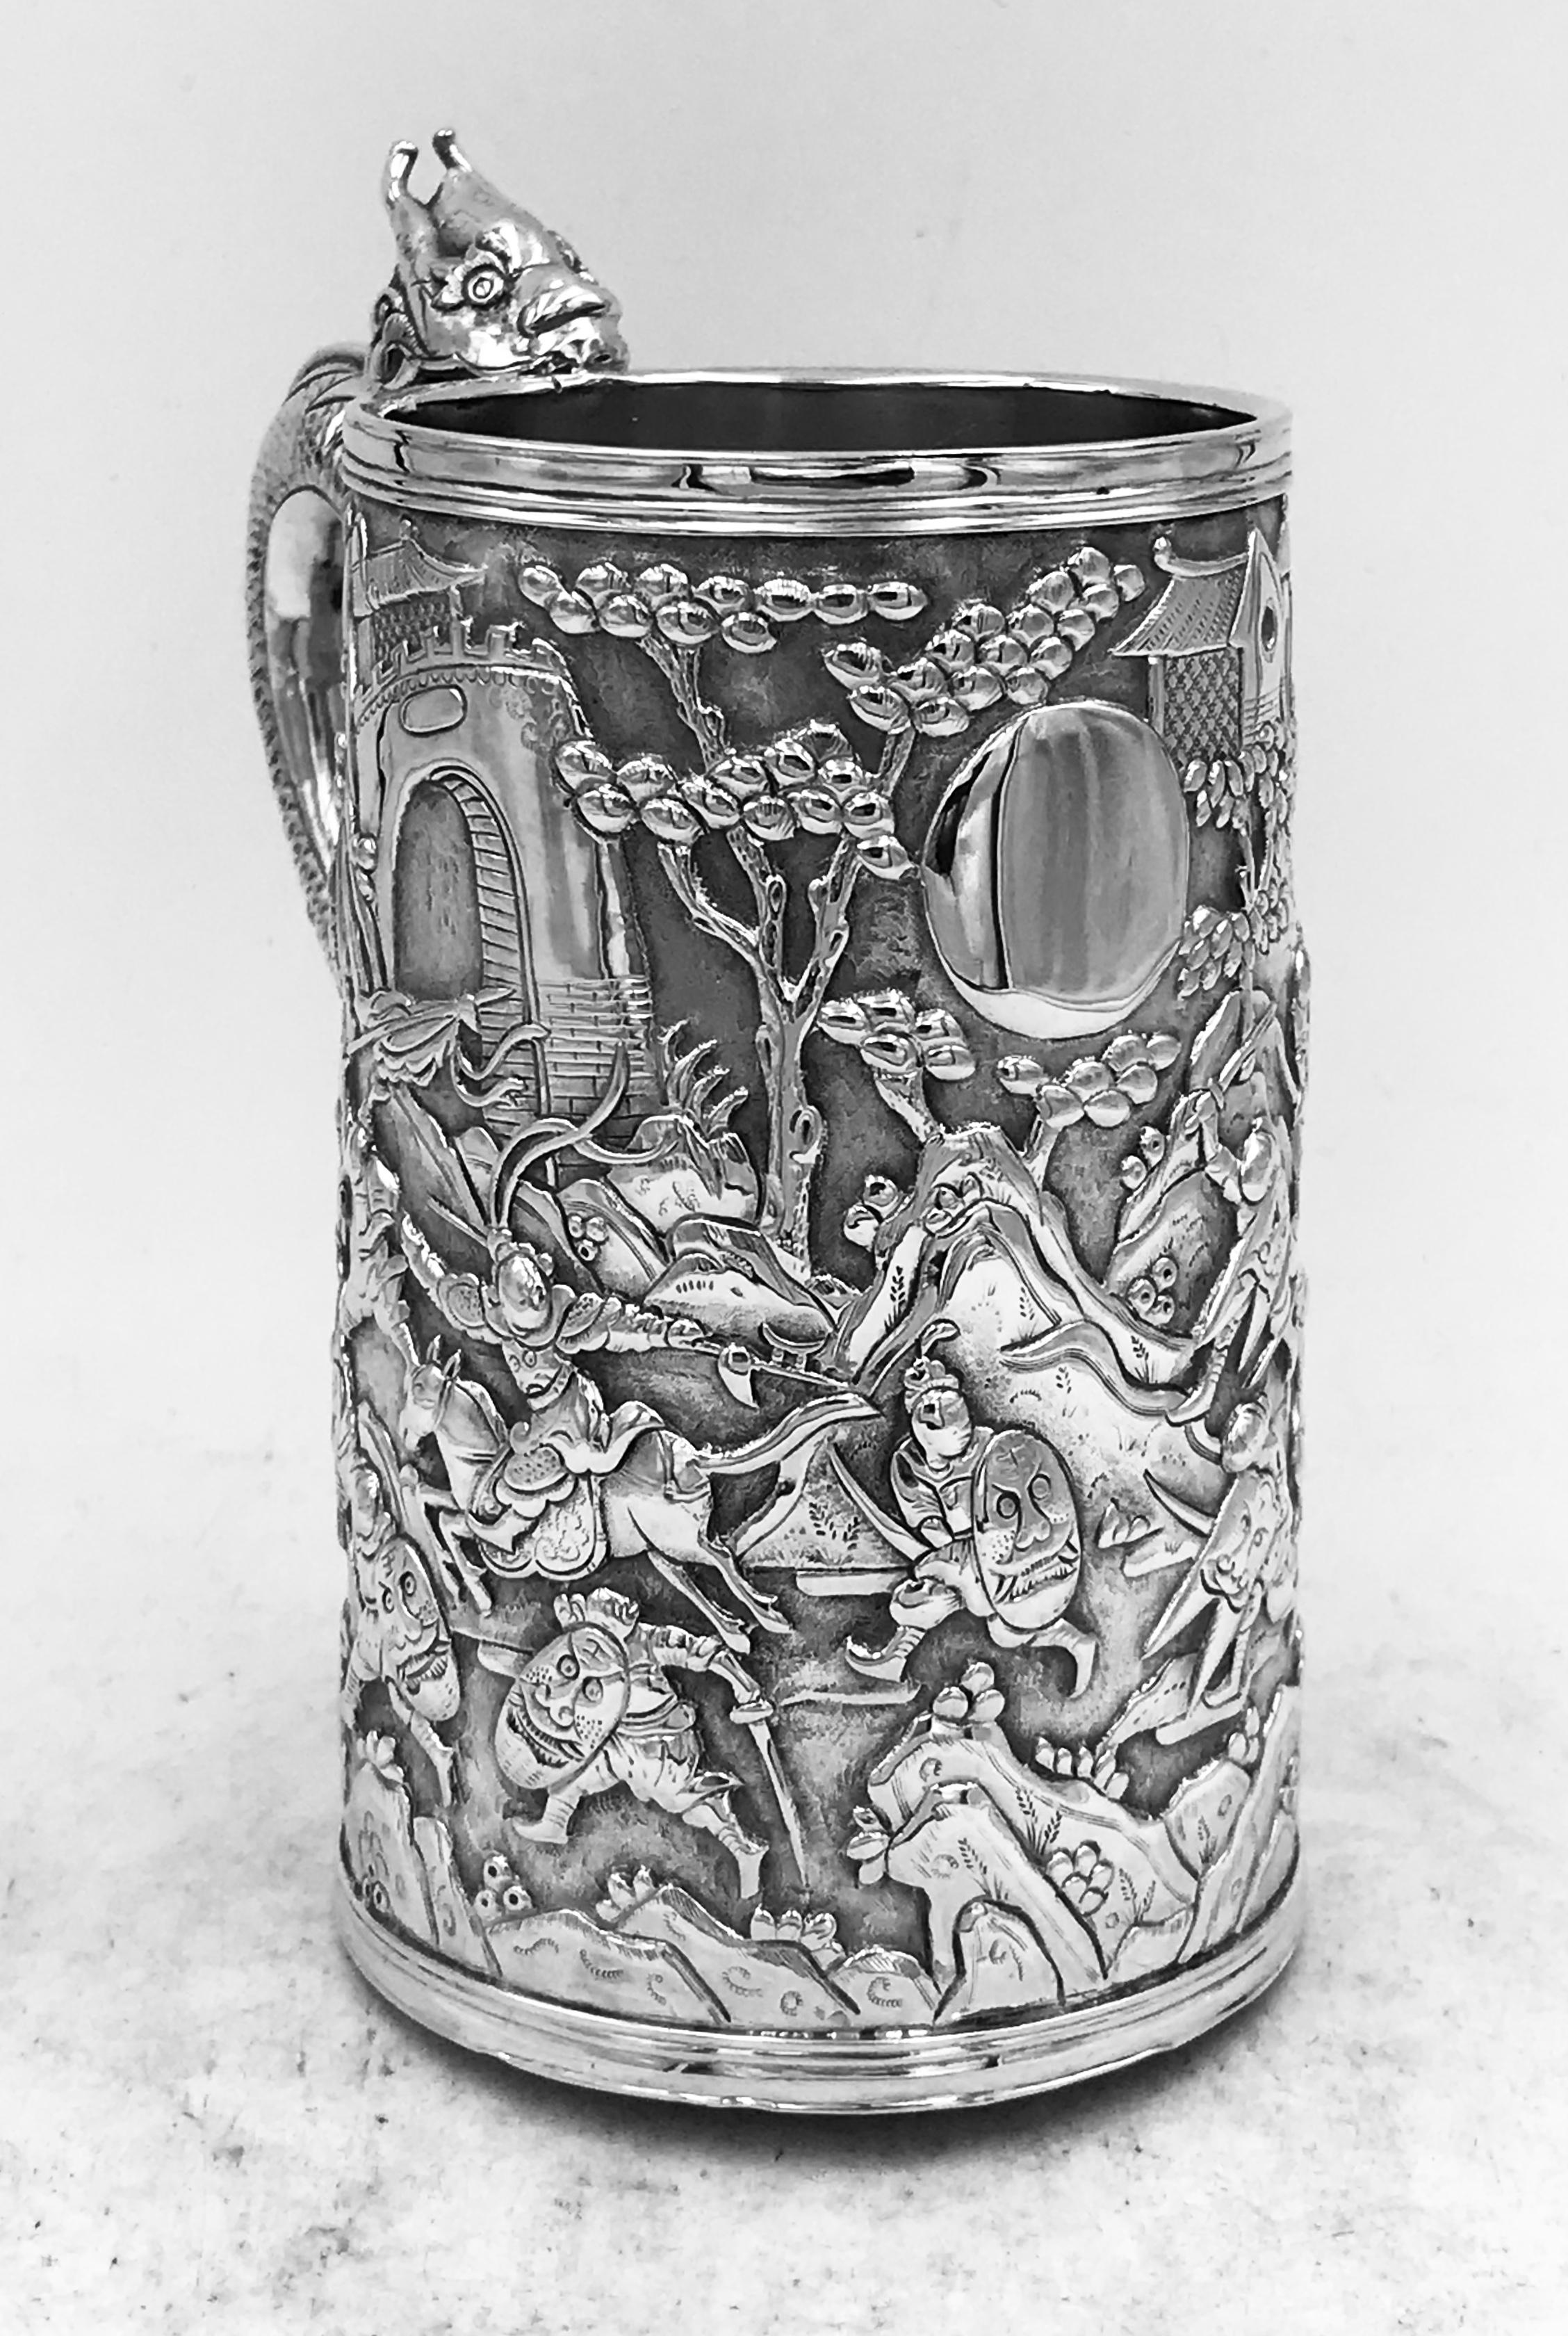 A Chinese silver mug of typical double-skinned construction, decorated with battle scenes against a matt background. It has a vacant cartouche and a dragon handle. Marked with HC, for Hung Chong 鸿昌.
Hung Chong was a retailer based in Canton from